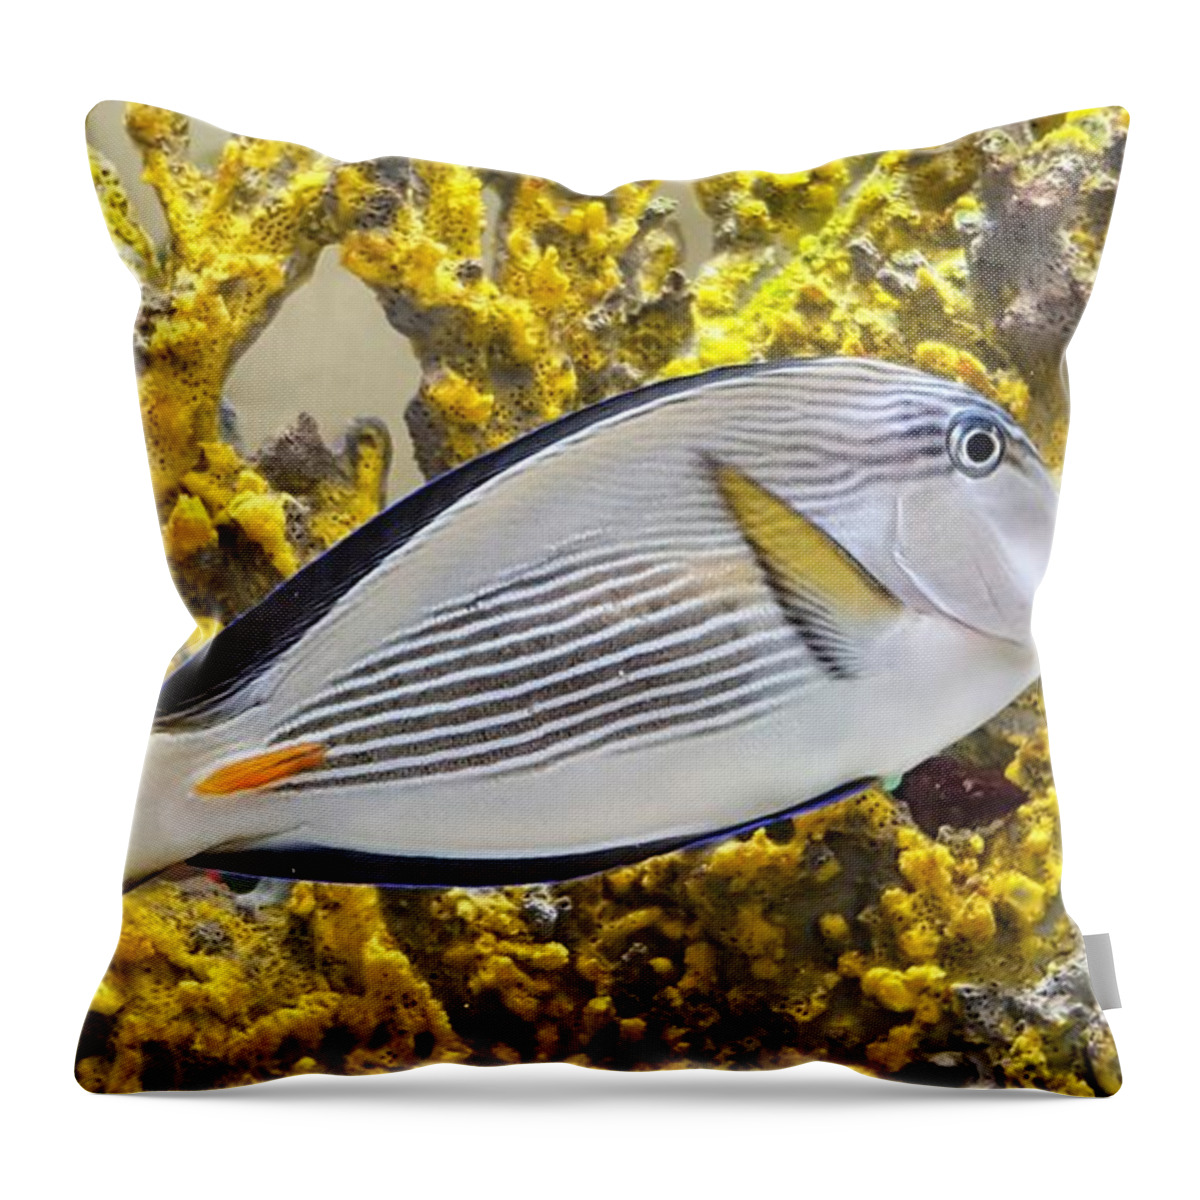 Nature Throw Pillow featuring the photograph Sohal Tang Surgeonfish by Les Classics